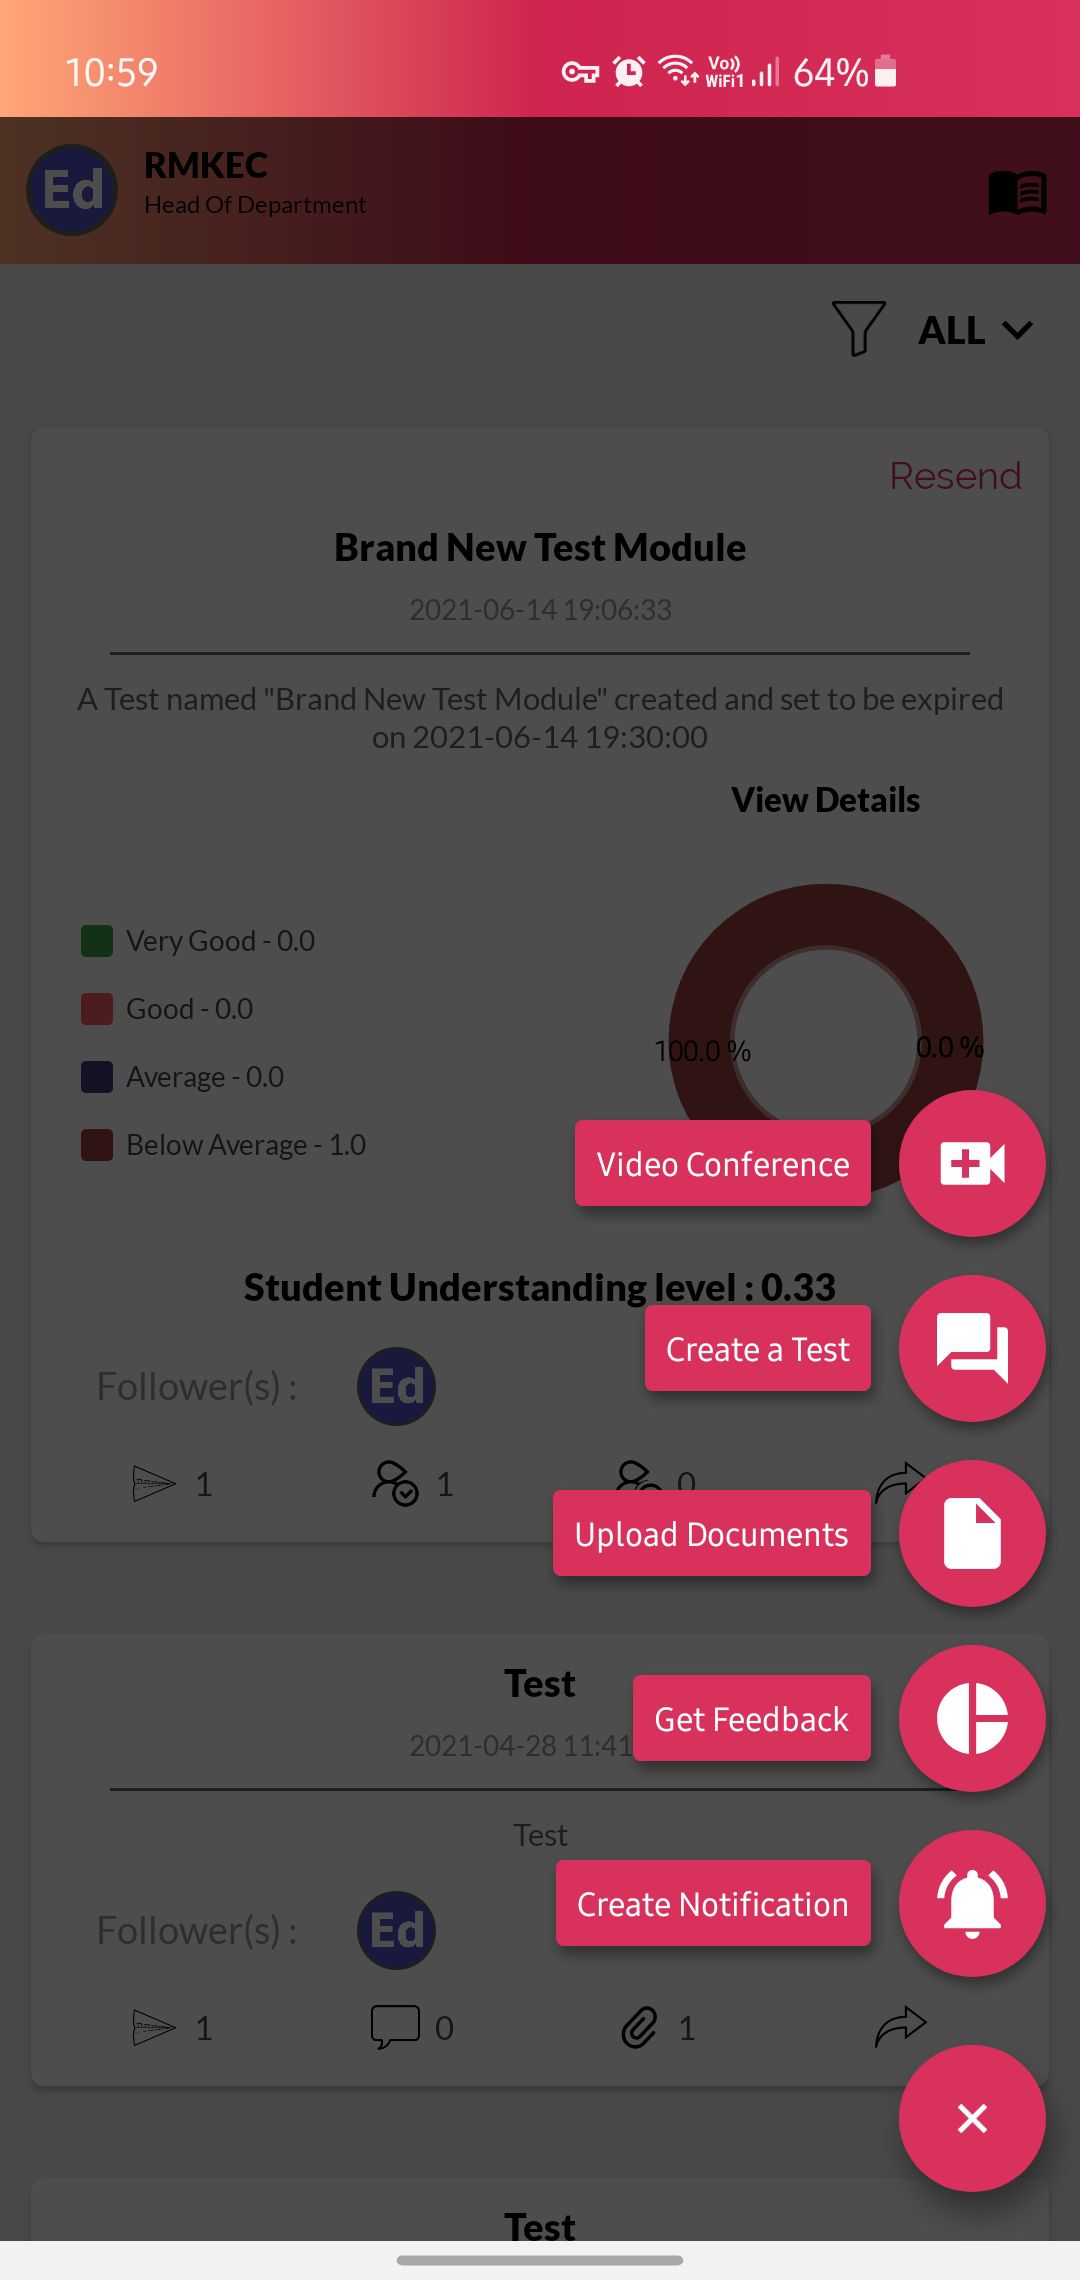 2. Tap on “Video Conference” to create a Live Class.